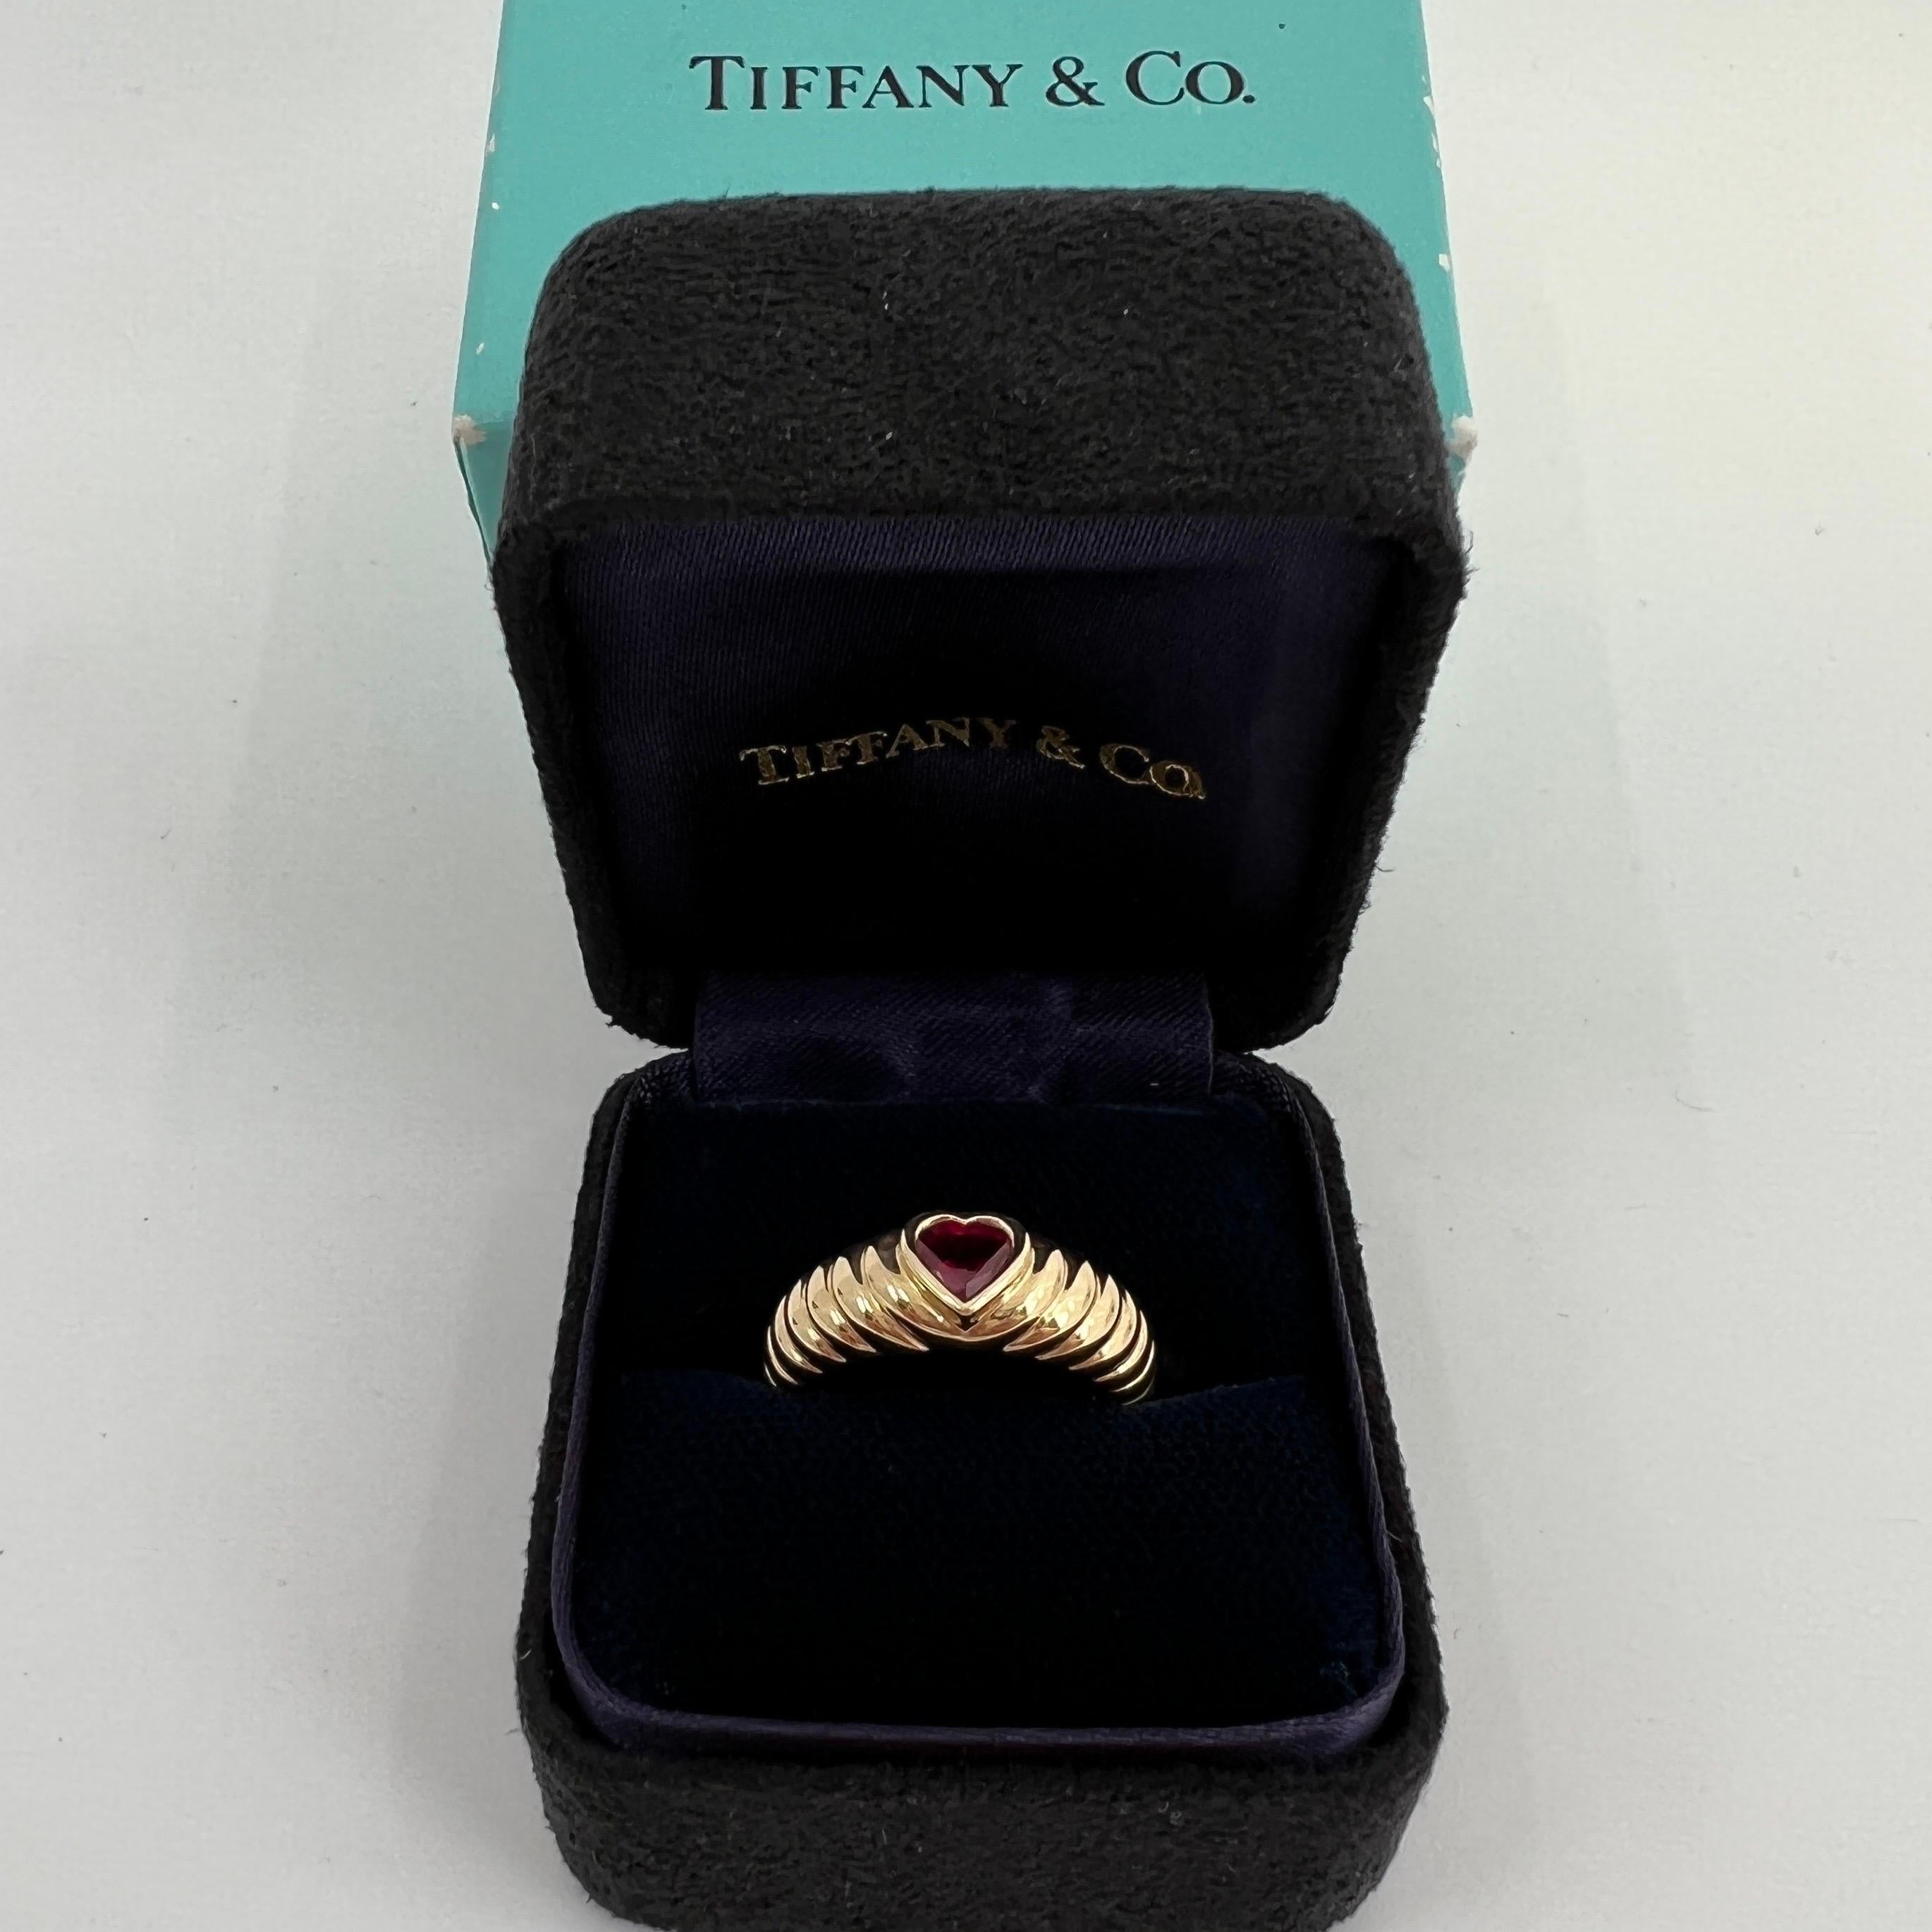 Weinlese Tiffany & Co. Vivid Blood Red Ruby Heart Cut 18k Gelbgold Band Ring 7